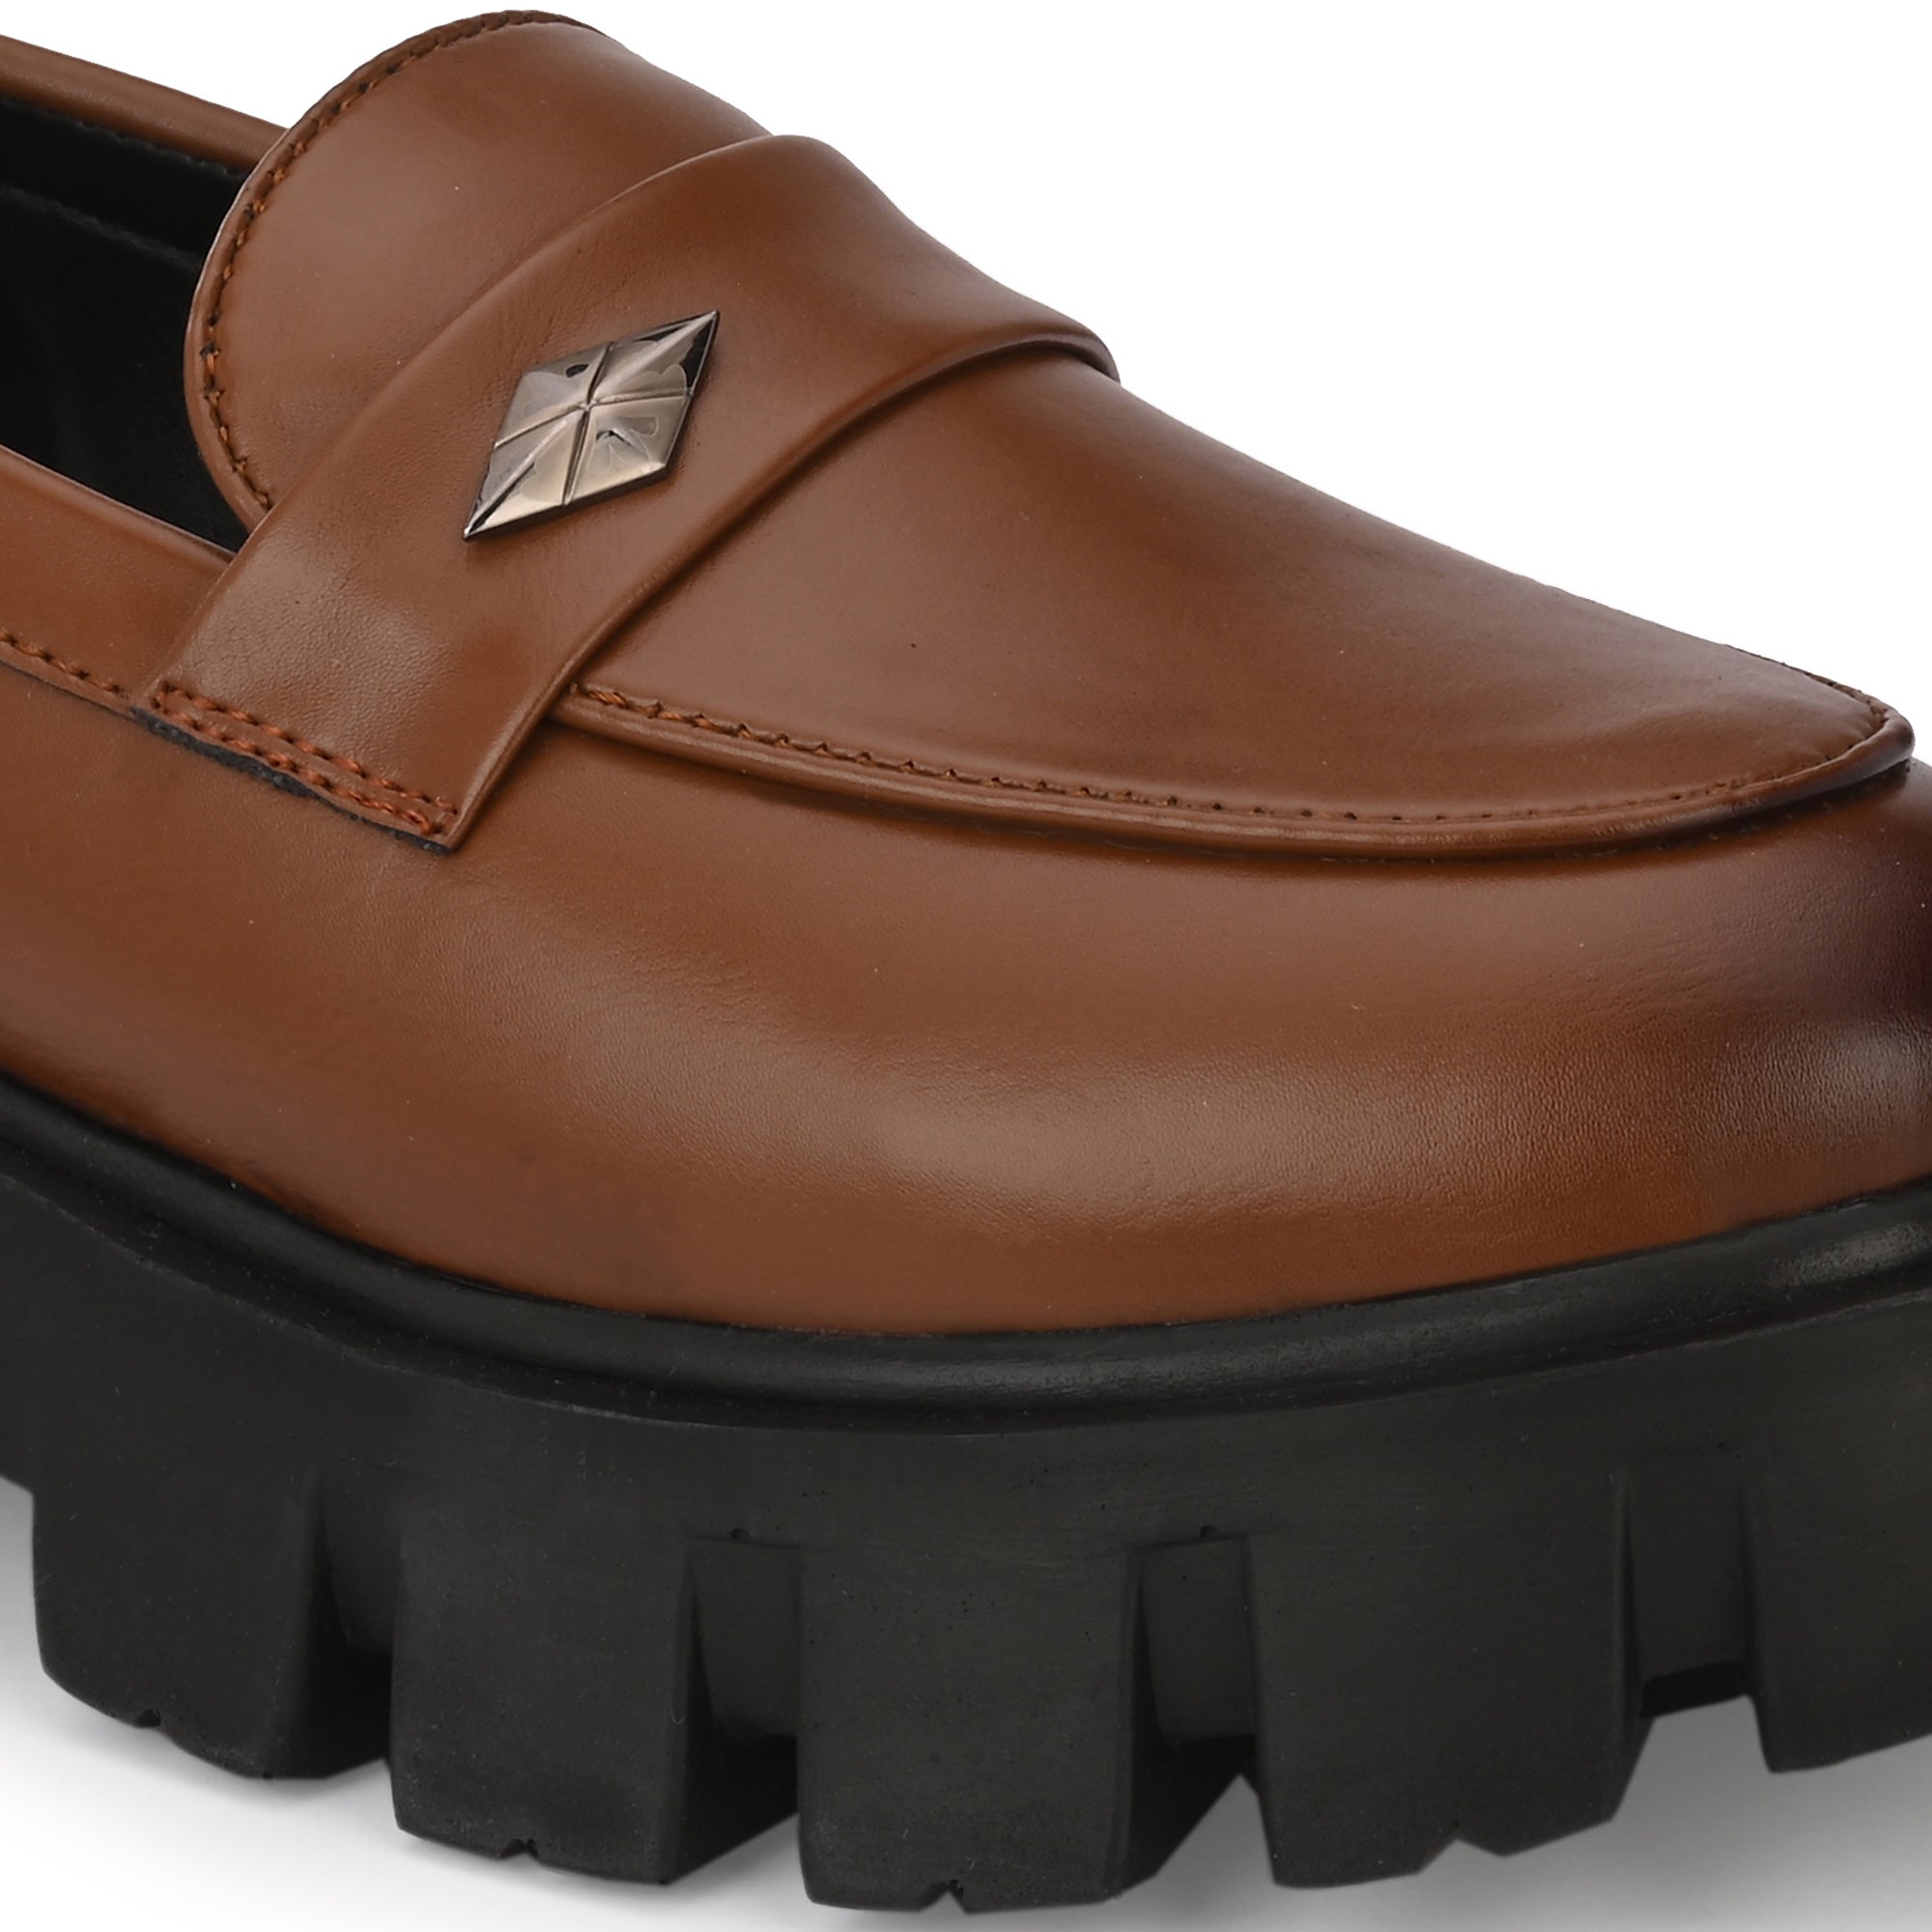 attitudist-tan-round-toe-high-heel-penny-loafer-shoes-for-men